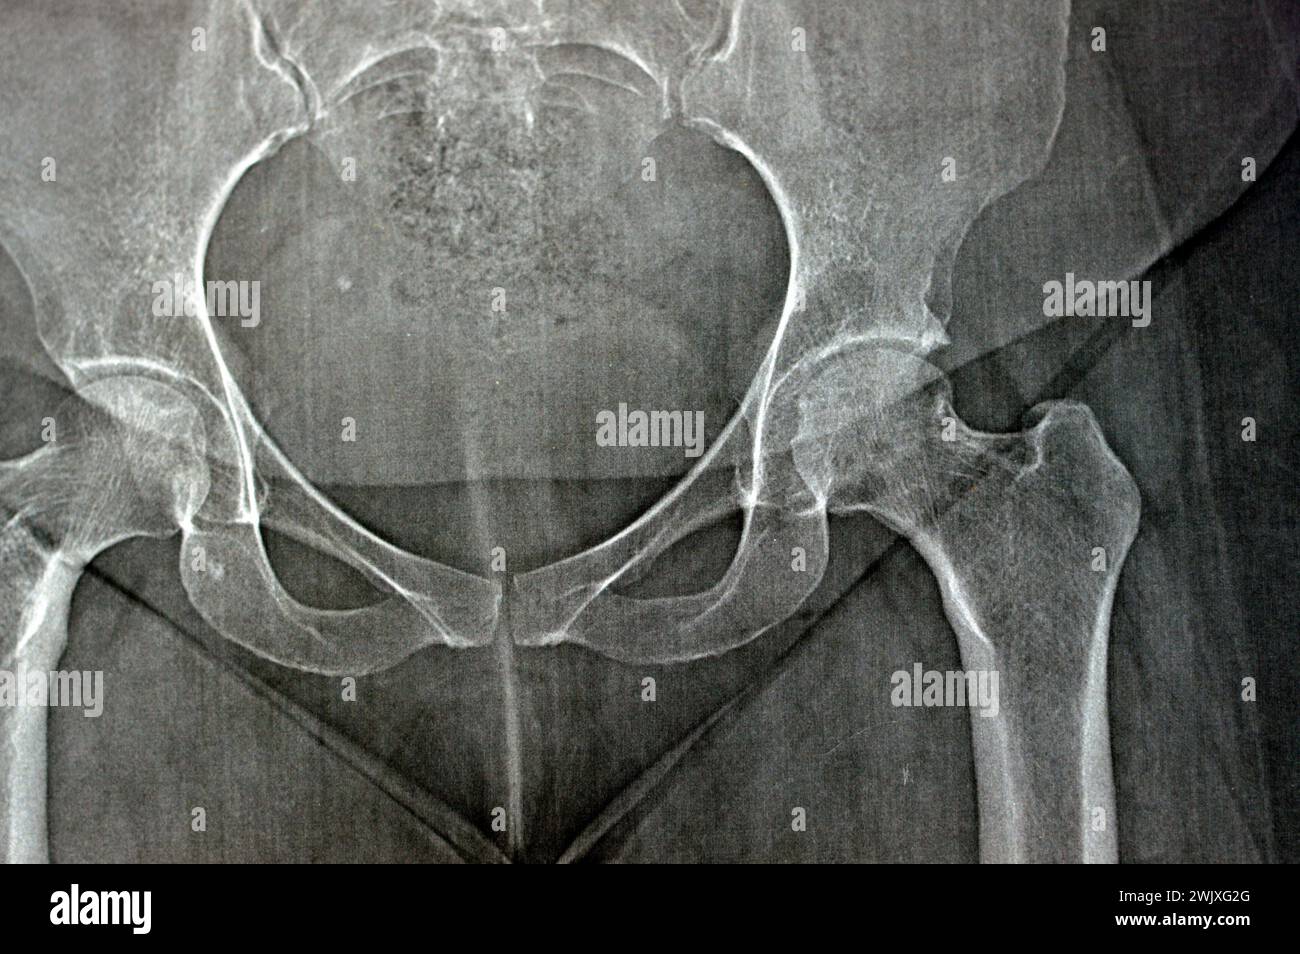 Plain X ray reveals bilateral Avascular necrosis (AVN) of the femoral head more in the left side, a type of aseptic osteonecrosis, which is caused dis Stock Photo